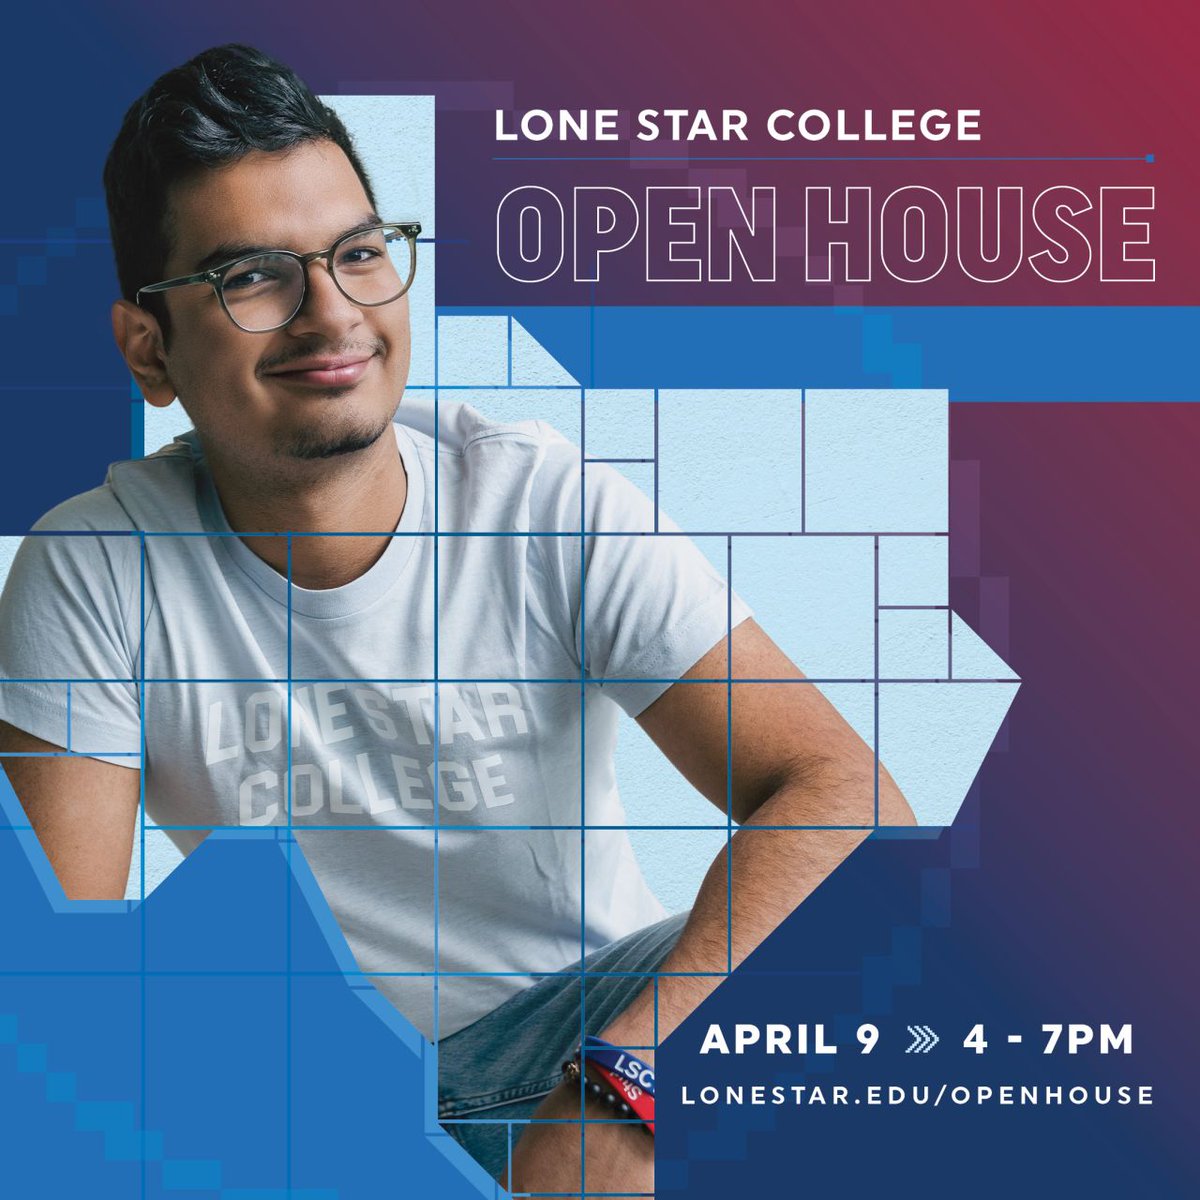 Discover endless possibilities at LSC! Join us on Tuesday, April 9 from 4-7 p.m. at our campuses for an exciting Open House event. Explore top-tier academic programs, cutting-edge workforce training, student clubs, and much more. #LSCOpportunities